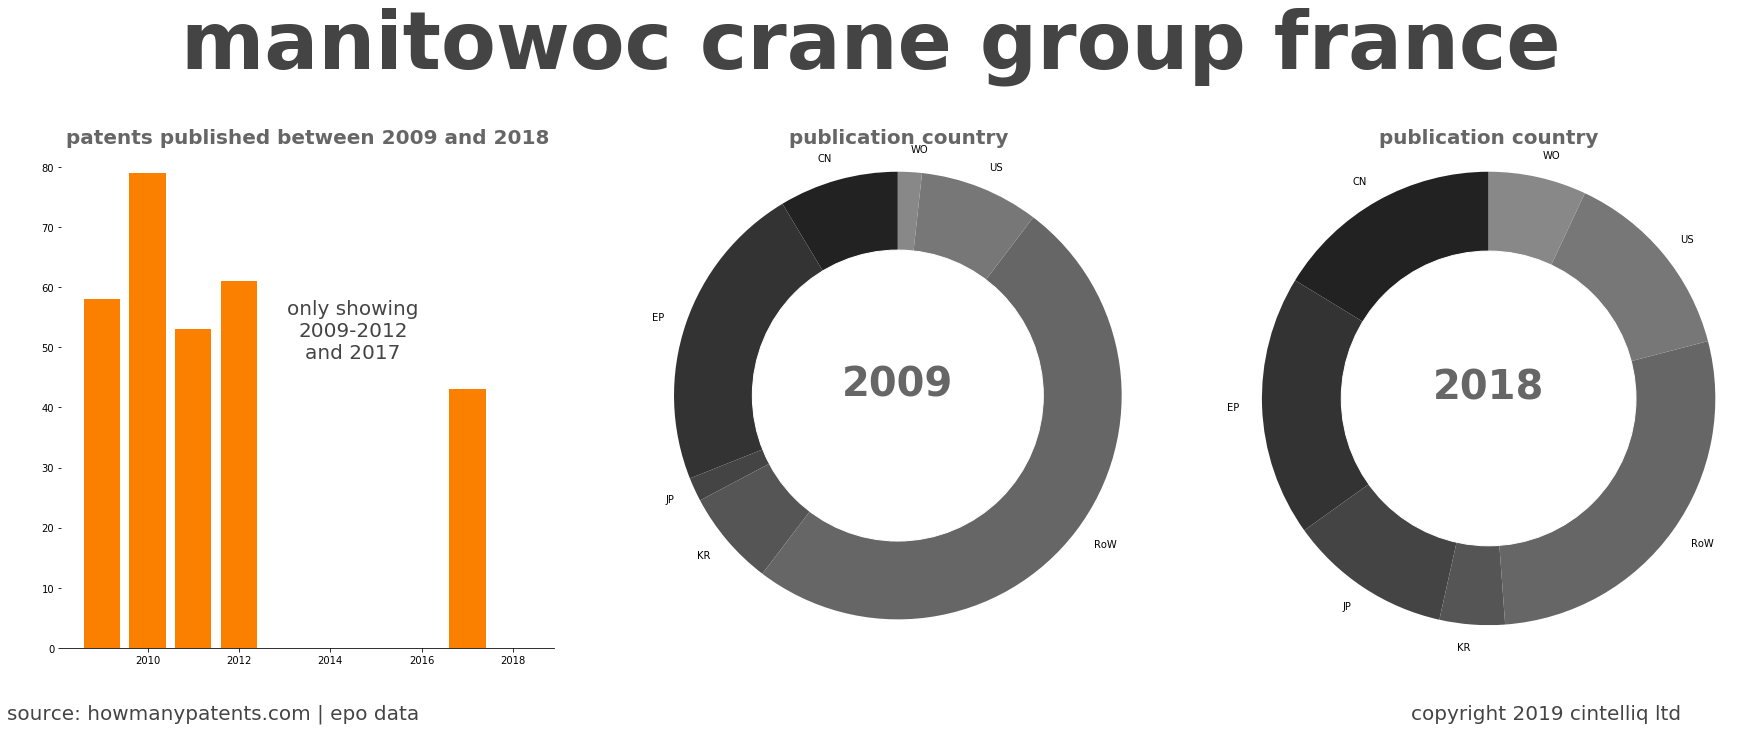 summary of patents for Manitowoc Crane Group France